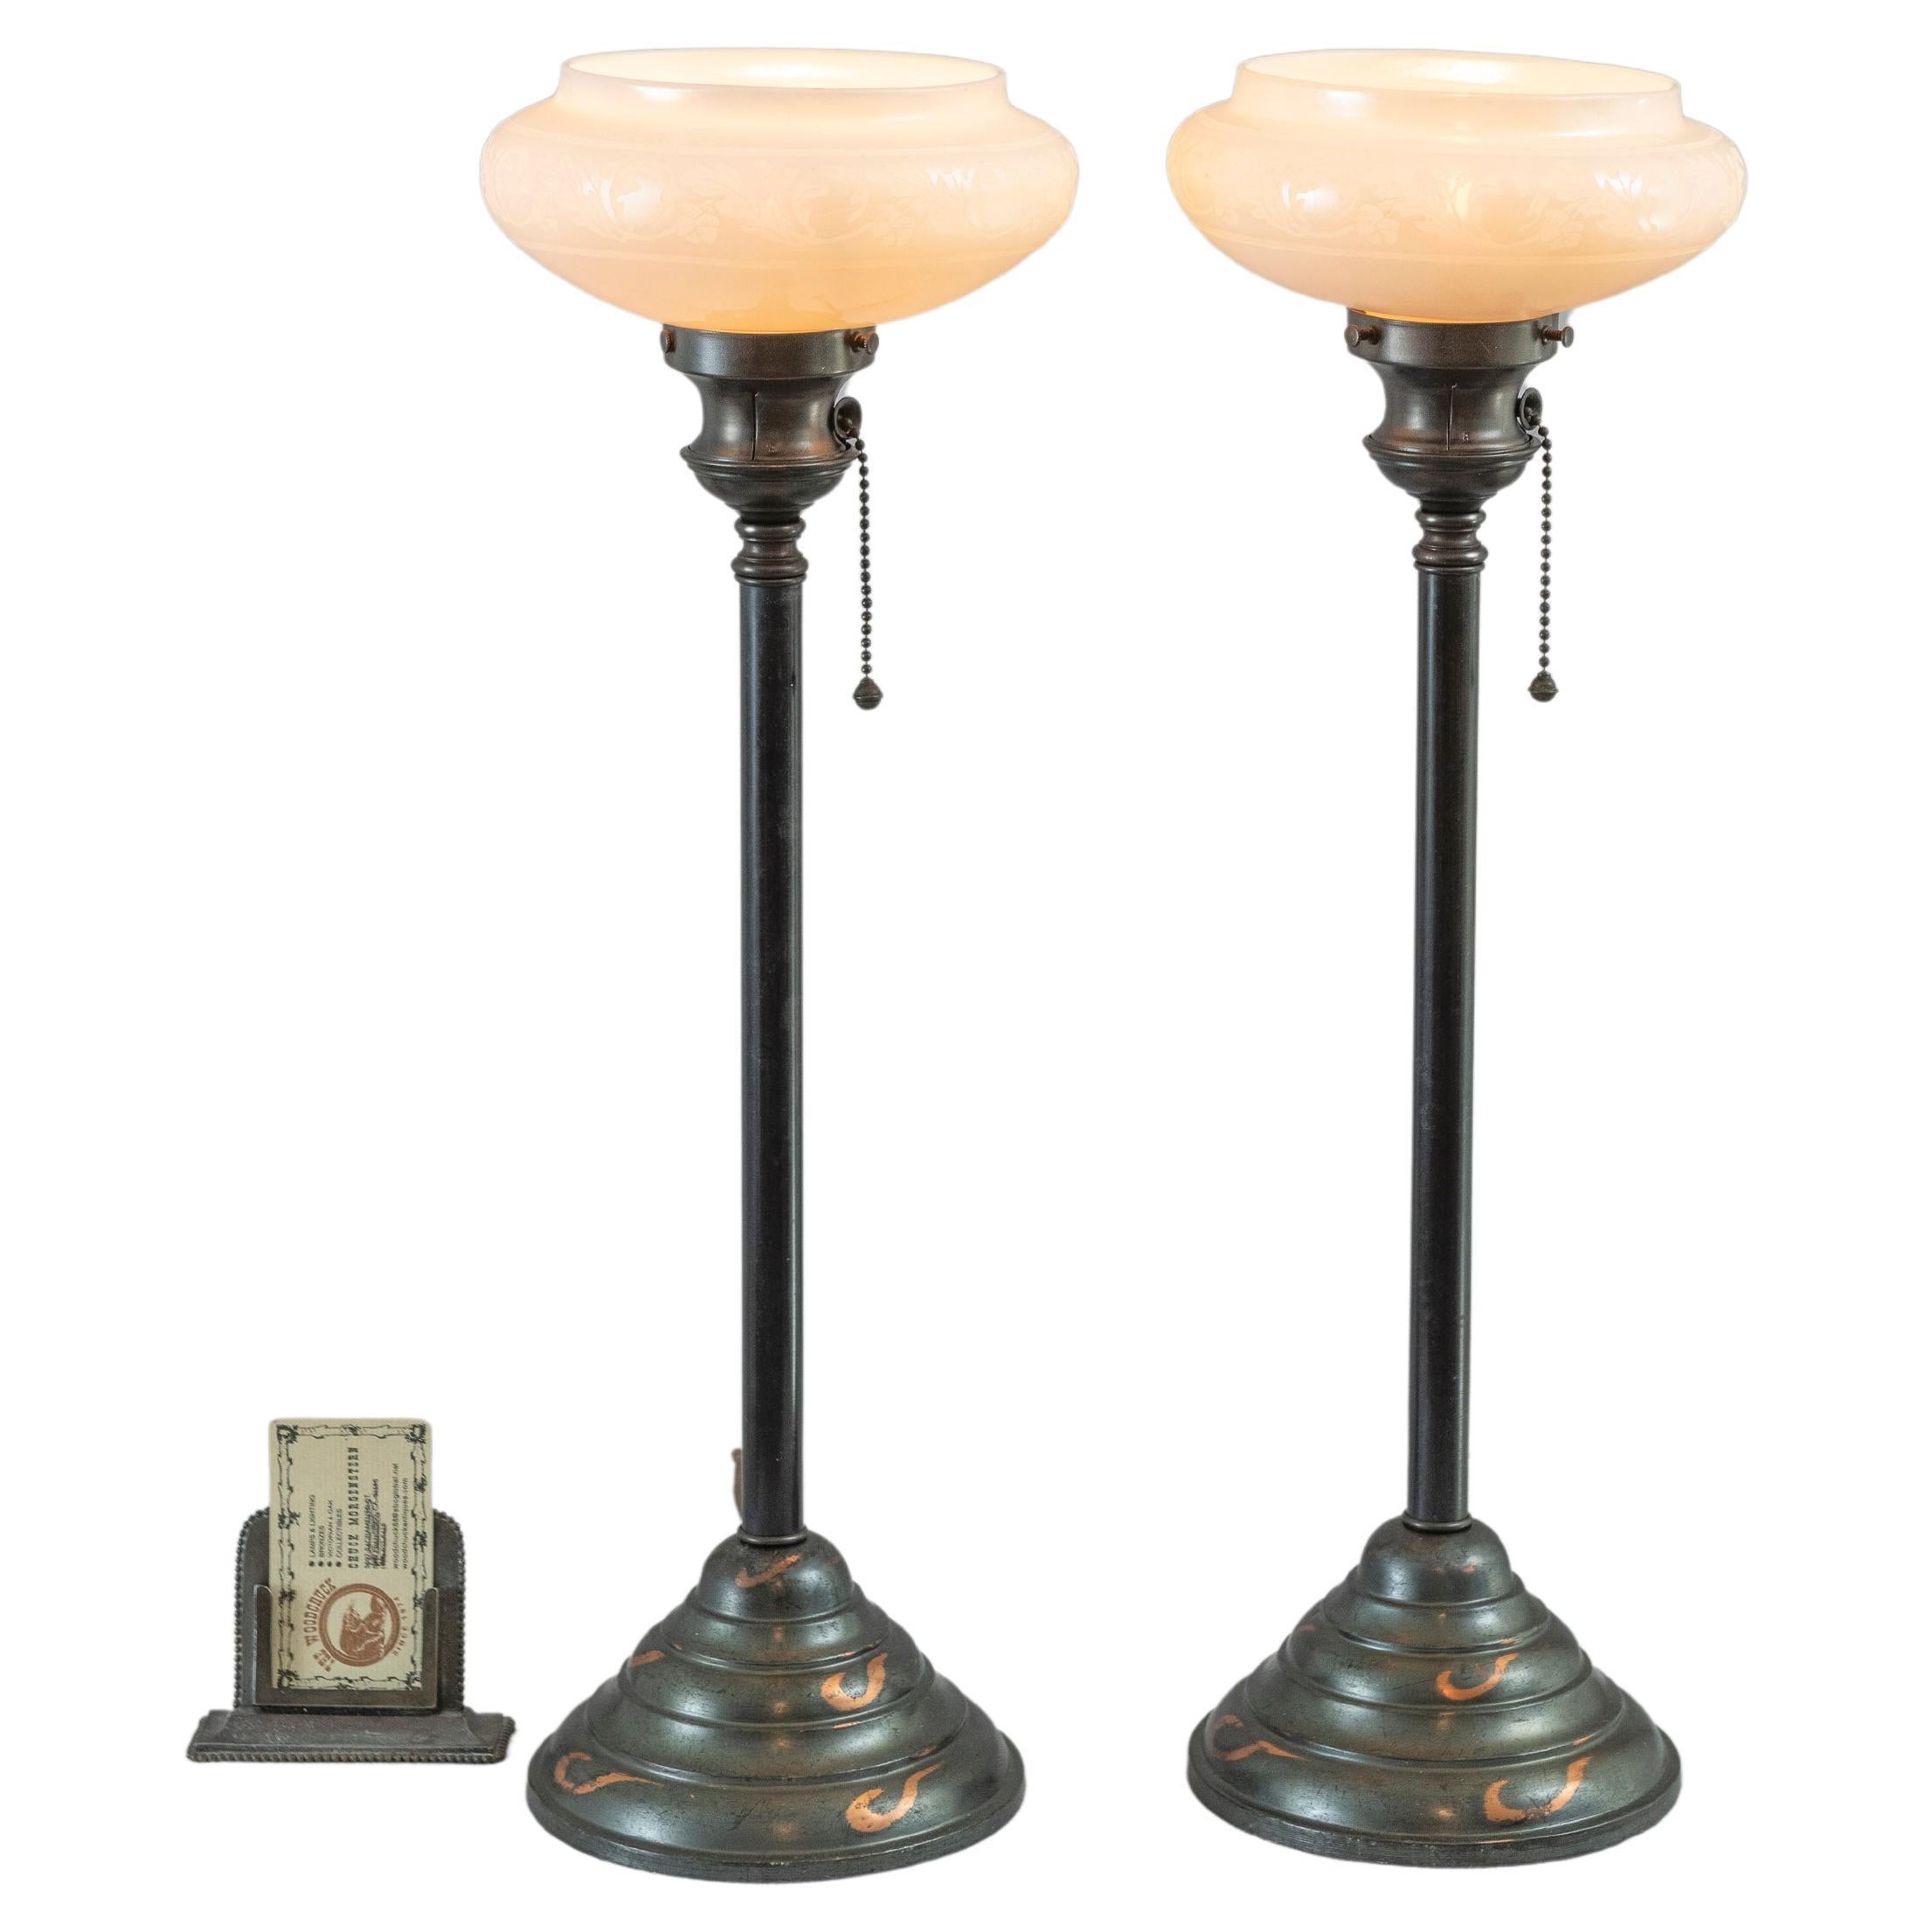 Pair Of Short Torchiere Lamps, Steuben Calcite Shades, Bronze Bases, ca. 1910